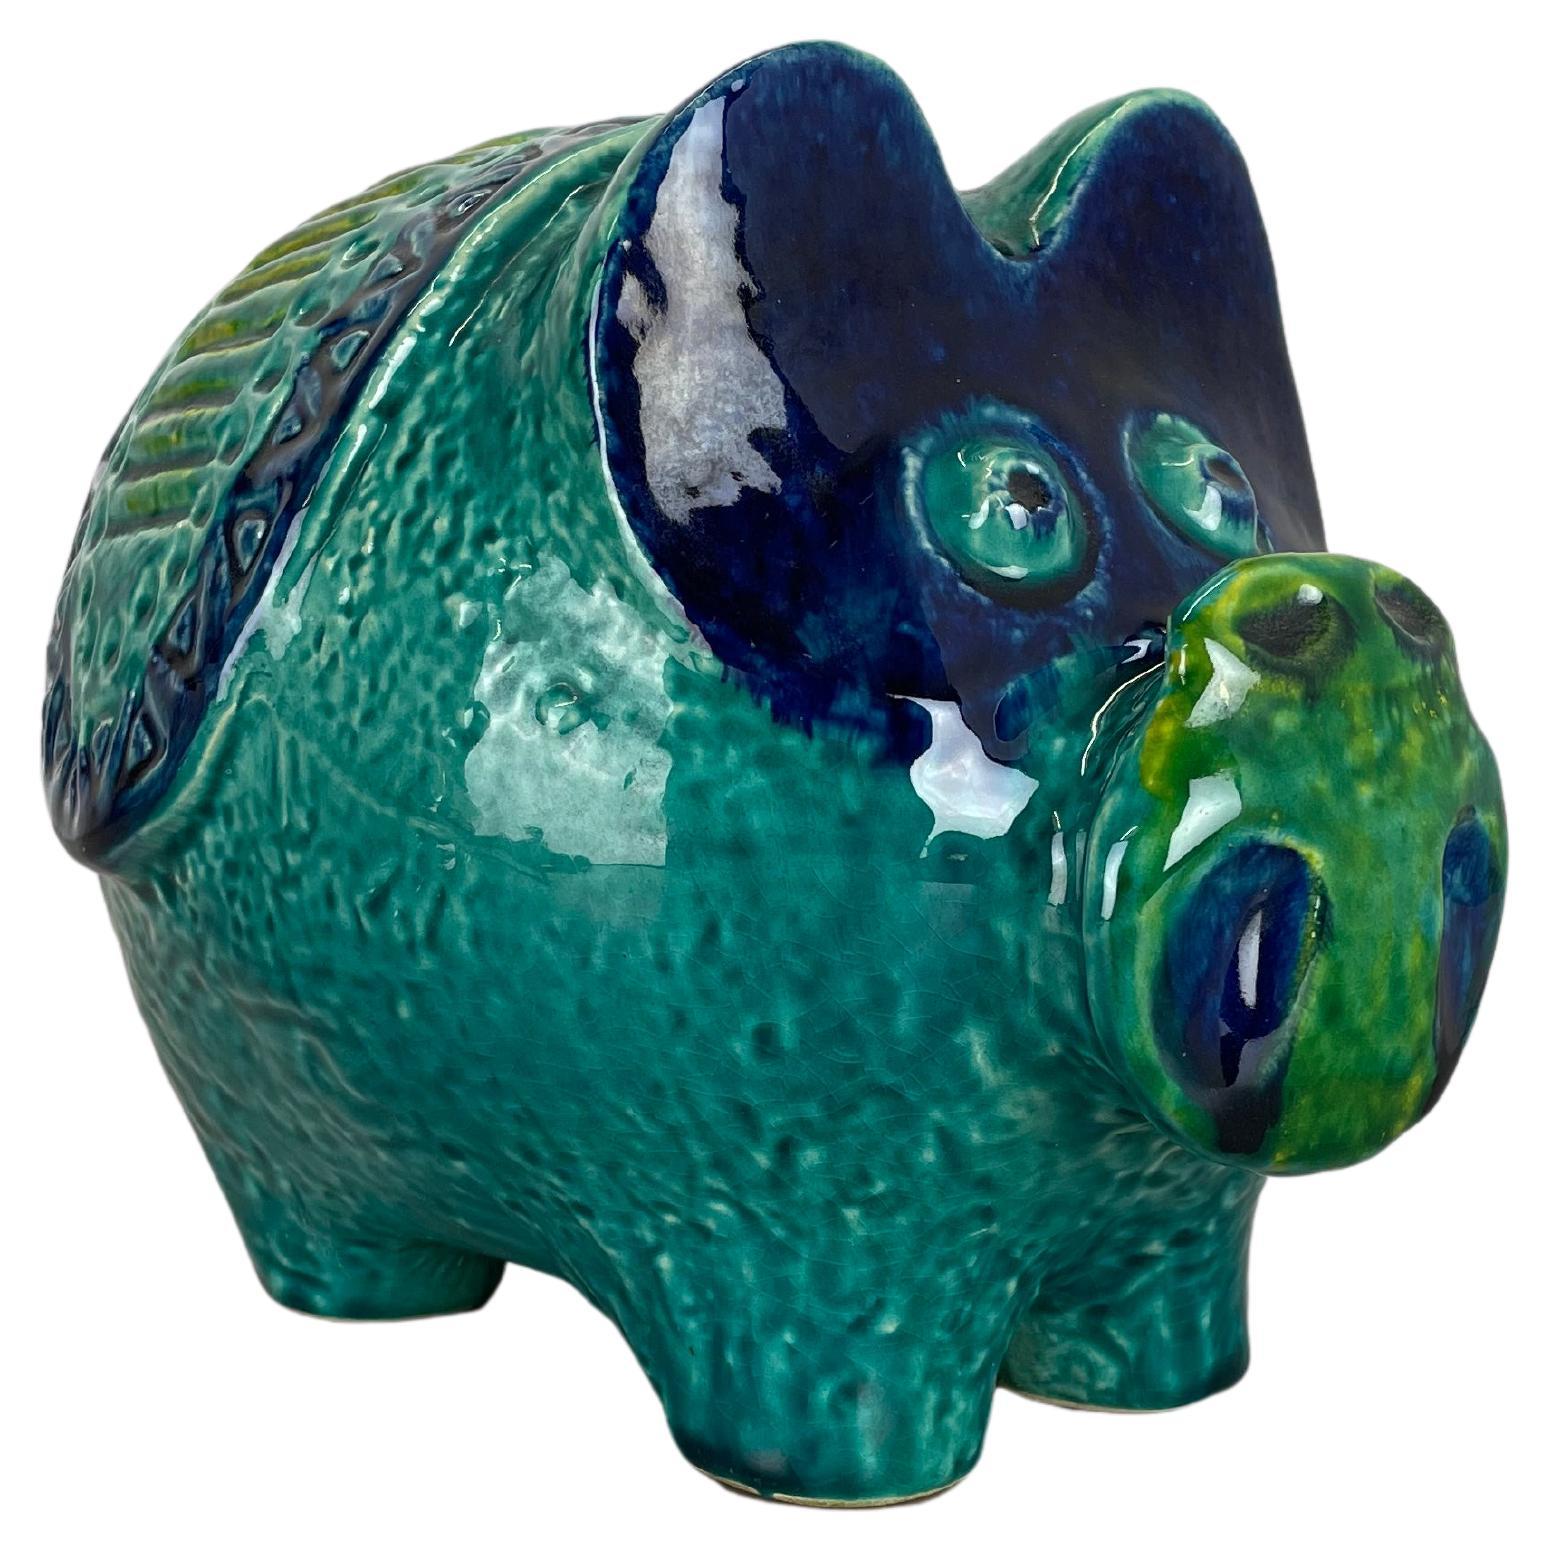 Colorful Fat Lava Pottery Swine Money Box Object by Bay Ceramics, Germany, 1970s For Sale